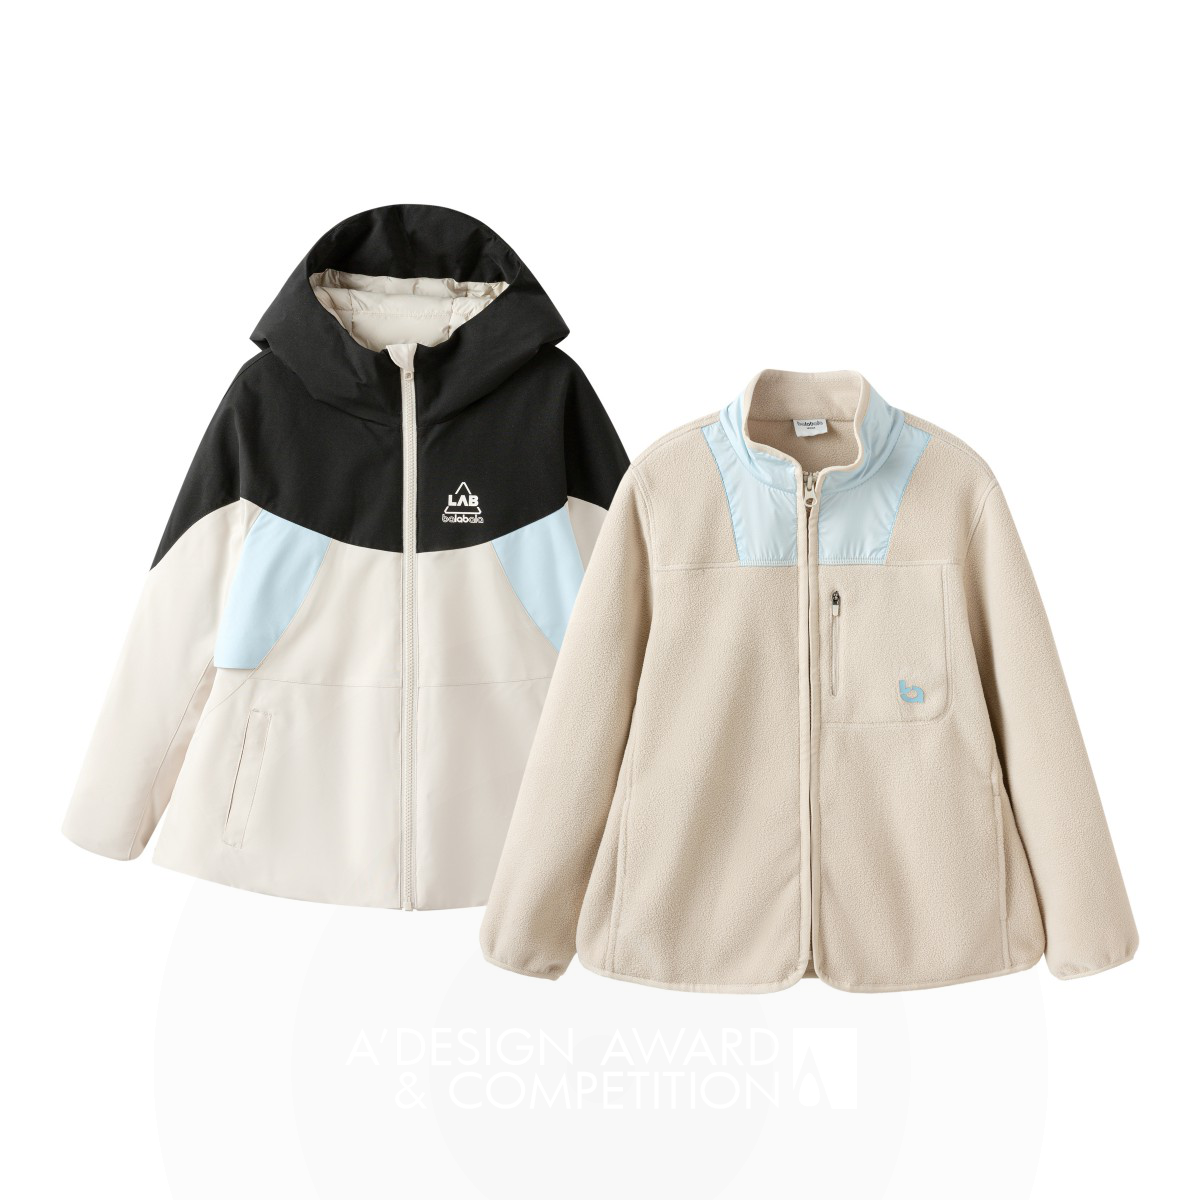 ZHE JIANG SEMIR GARMENT CO.,LTD. wins Bronze at the prestigious A' Baby, Kids and Children's Products Design Award with Flame-retardant Down Jacket Kids&#039; Clothing.